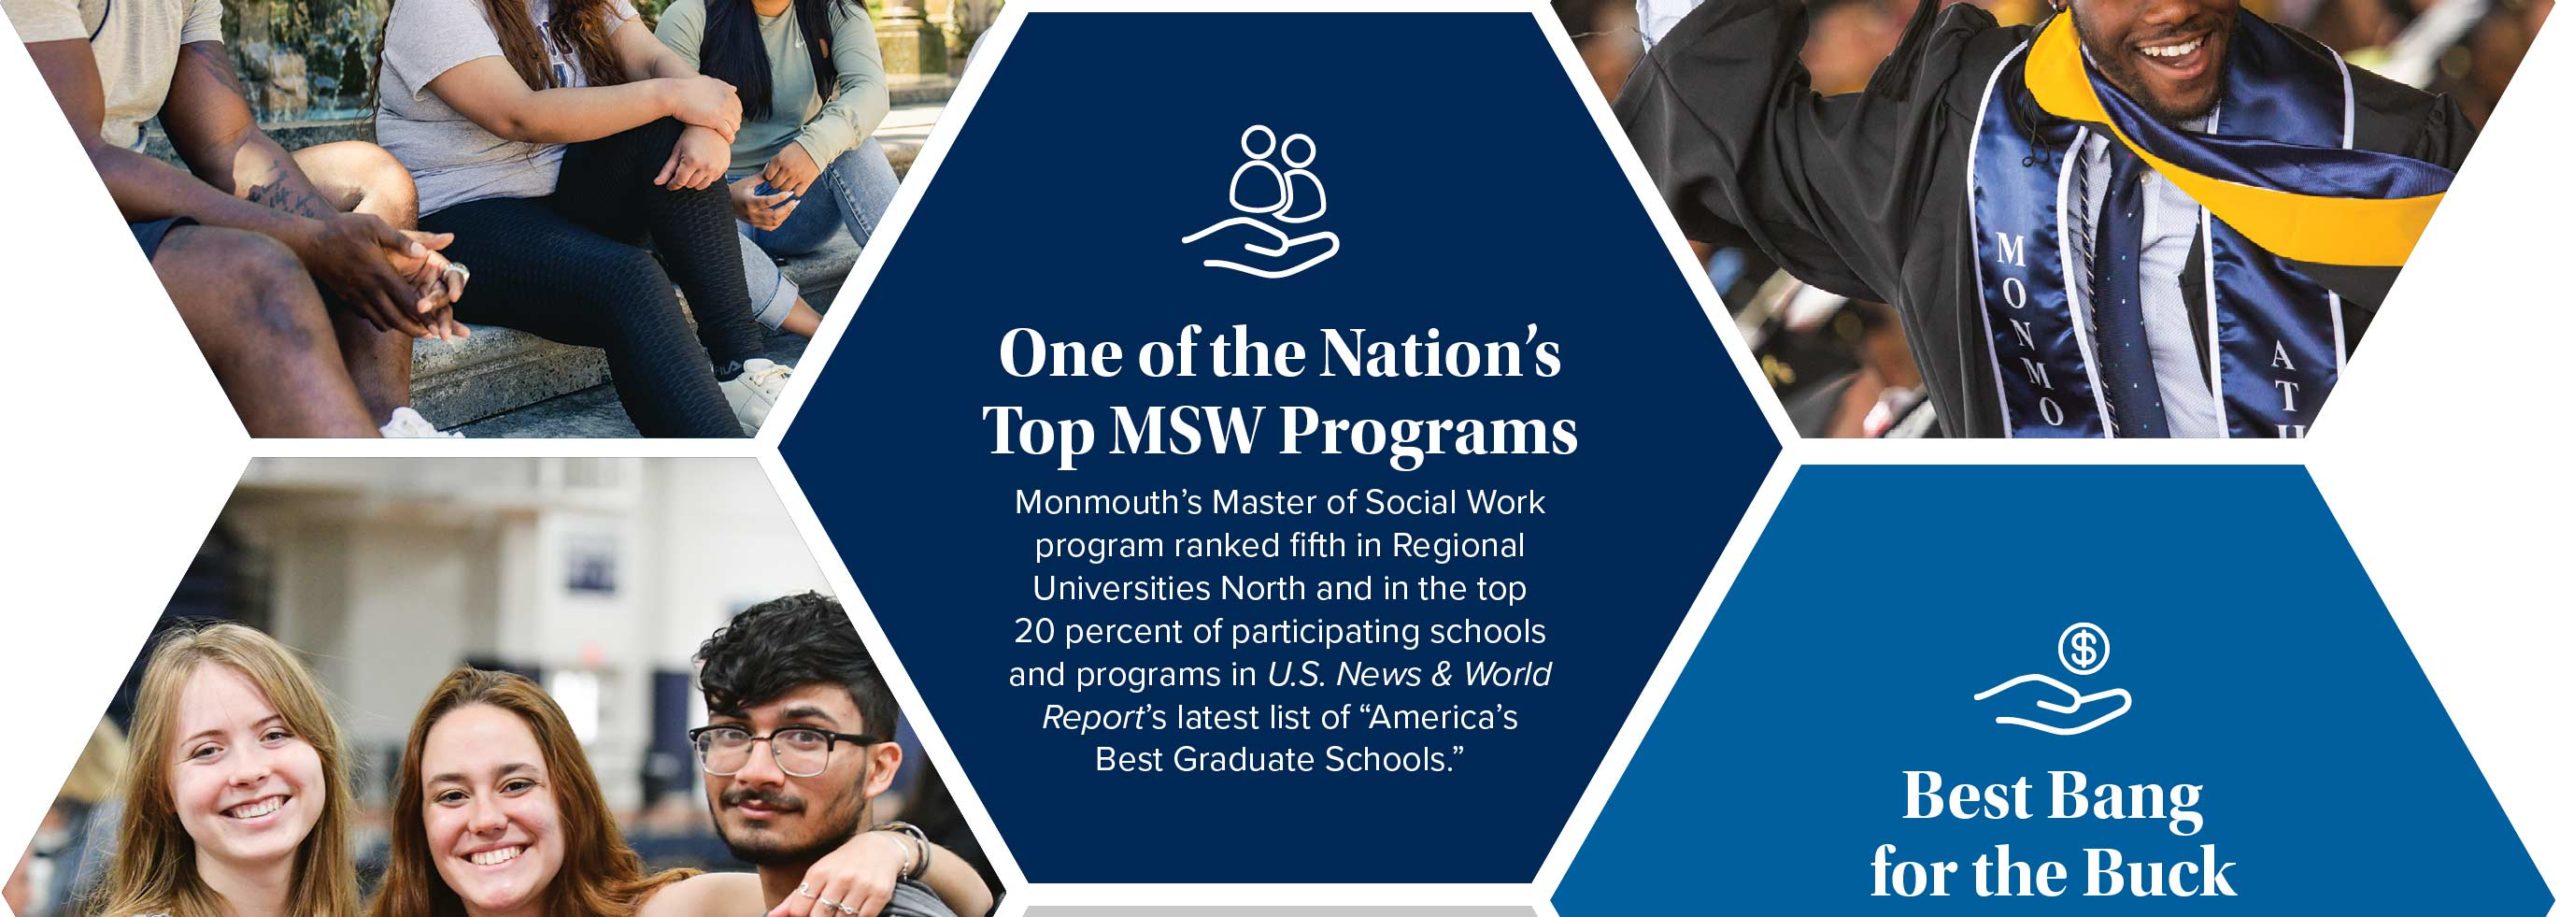 One of the Nation’s Top MSW Programs Monmouth’s Master of Social Work program ranked fifth in Regional Universities North and in the top 20 percent of participating schools and programs in U.S. News & World Report’s latest list of “America’s Best Graduate Schools.”